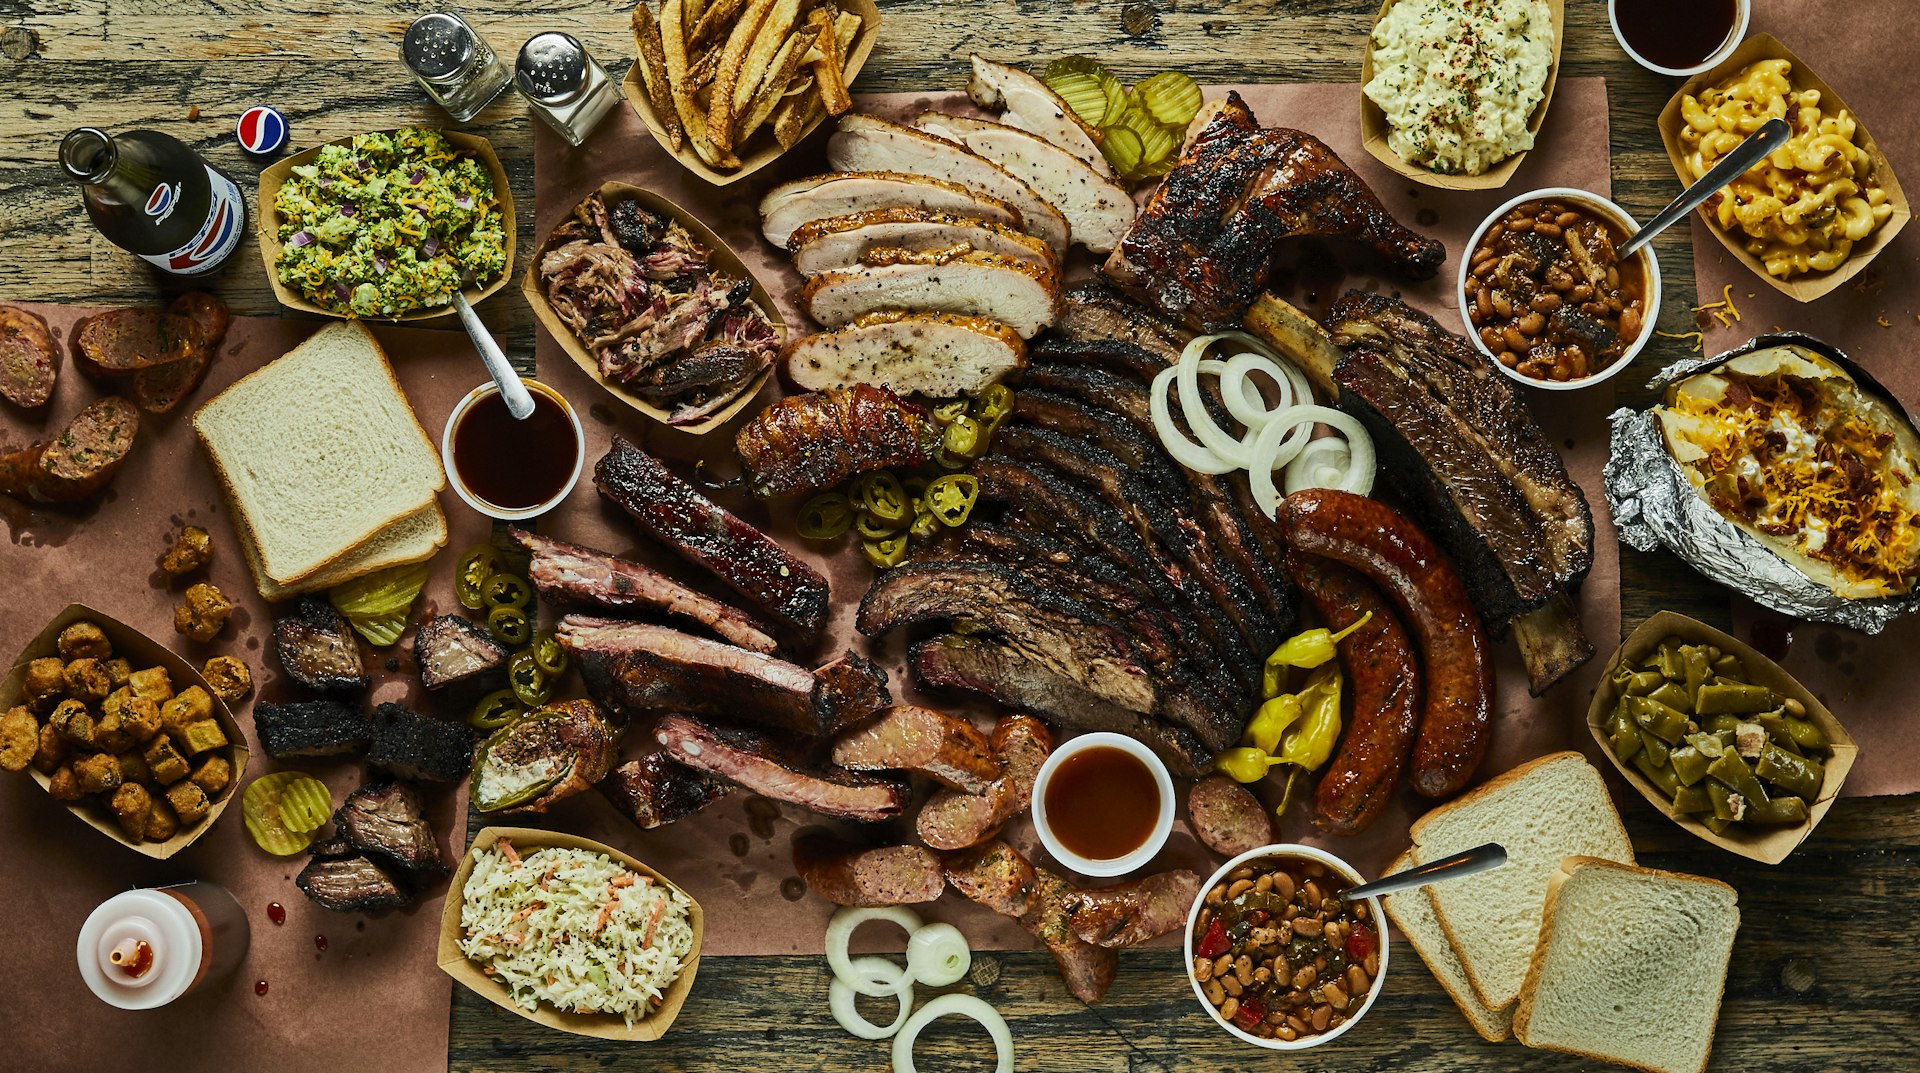 Many plates of Texas barbecue and side dishes arranged on a table